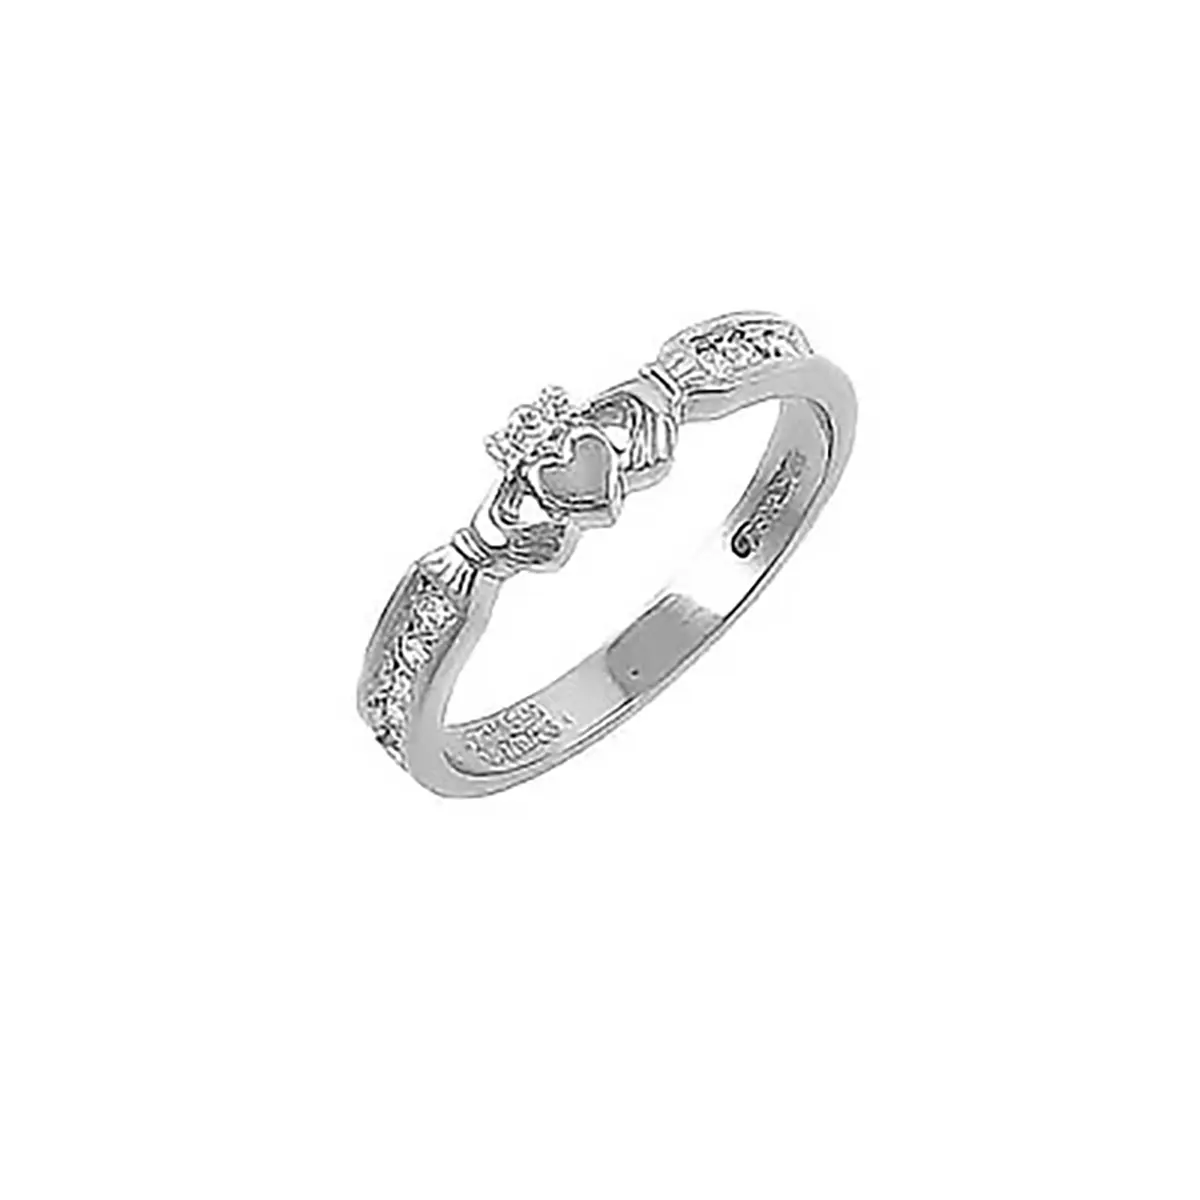 1_1_Claddagh Ring Wedding White Gold And Diamond...